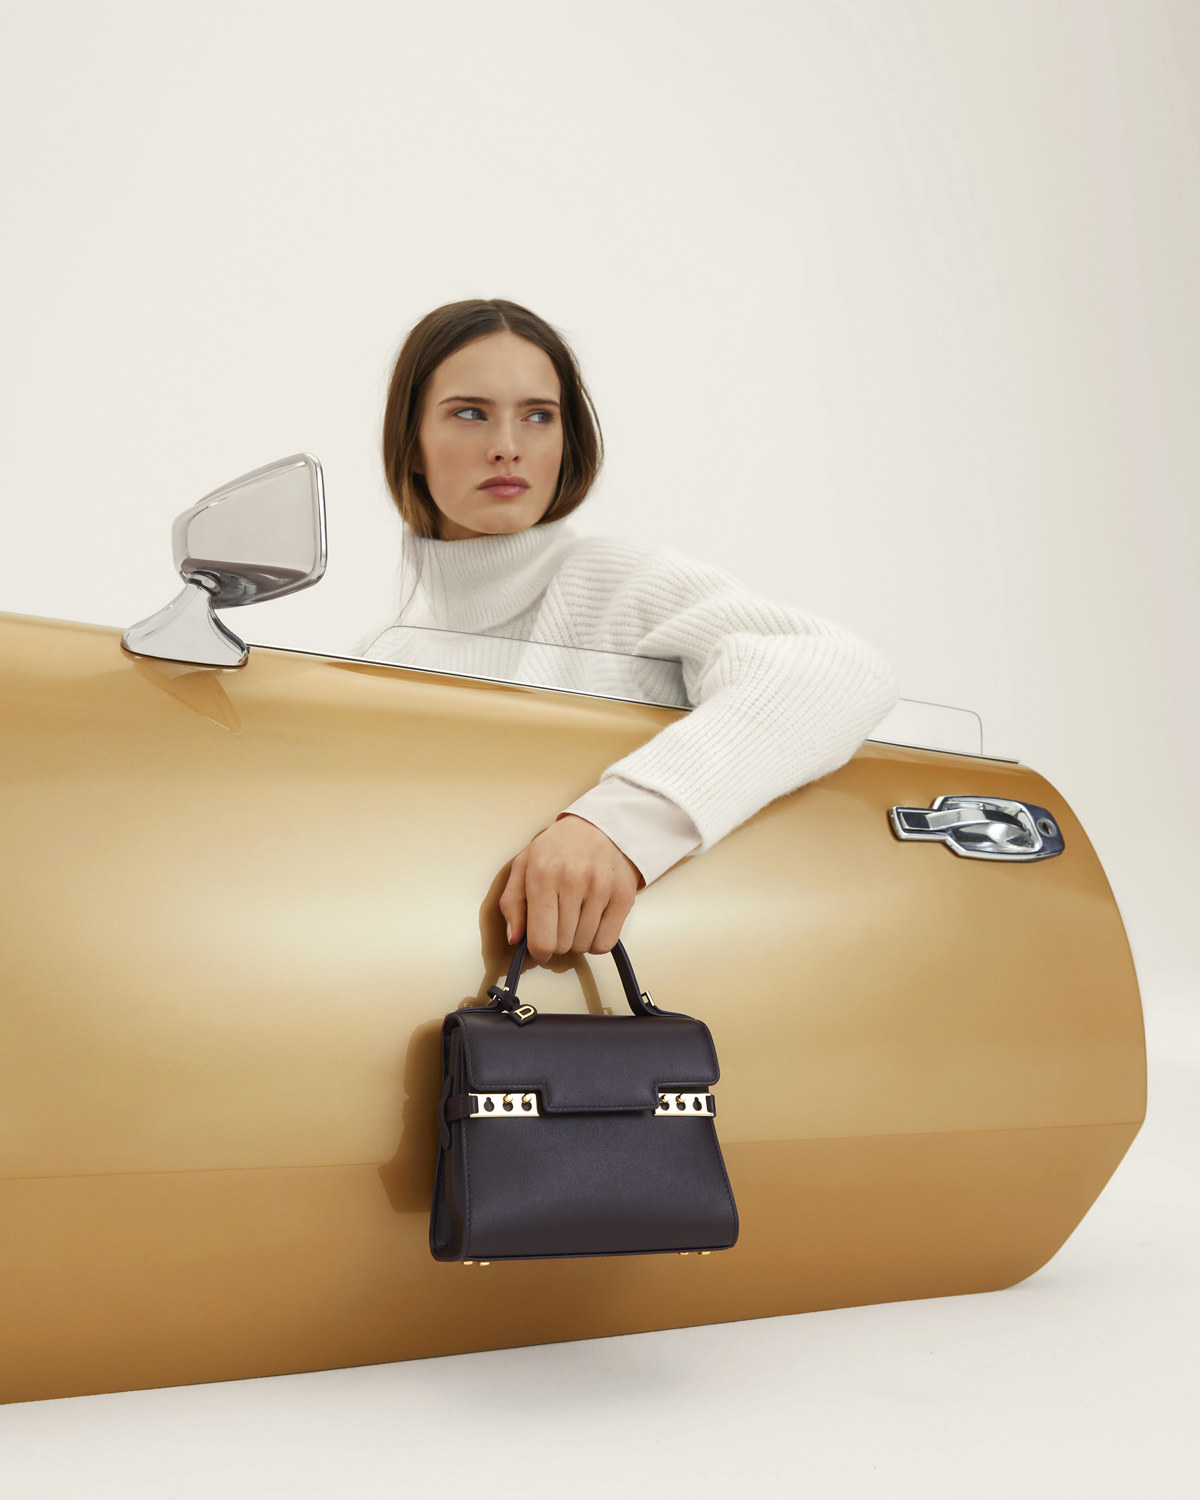 Delvaux Launches Its New Autumn-Winter 2021 Collection: Ode To The Road - Mythical Highway